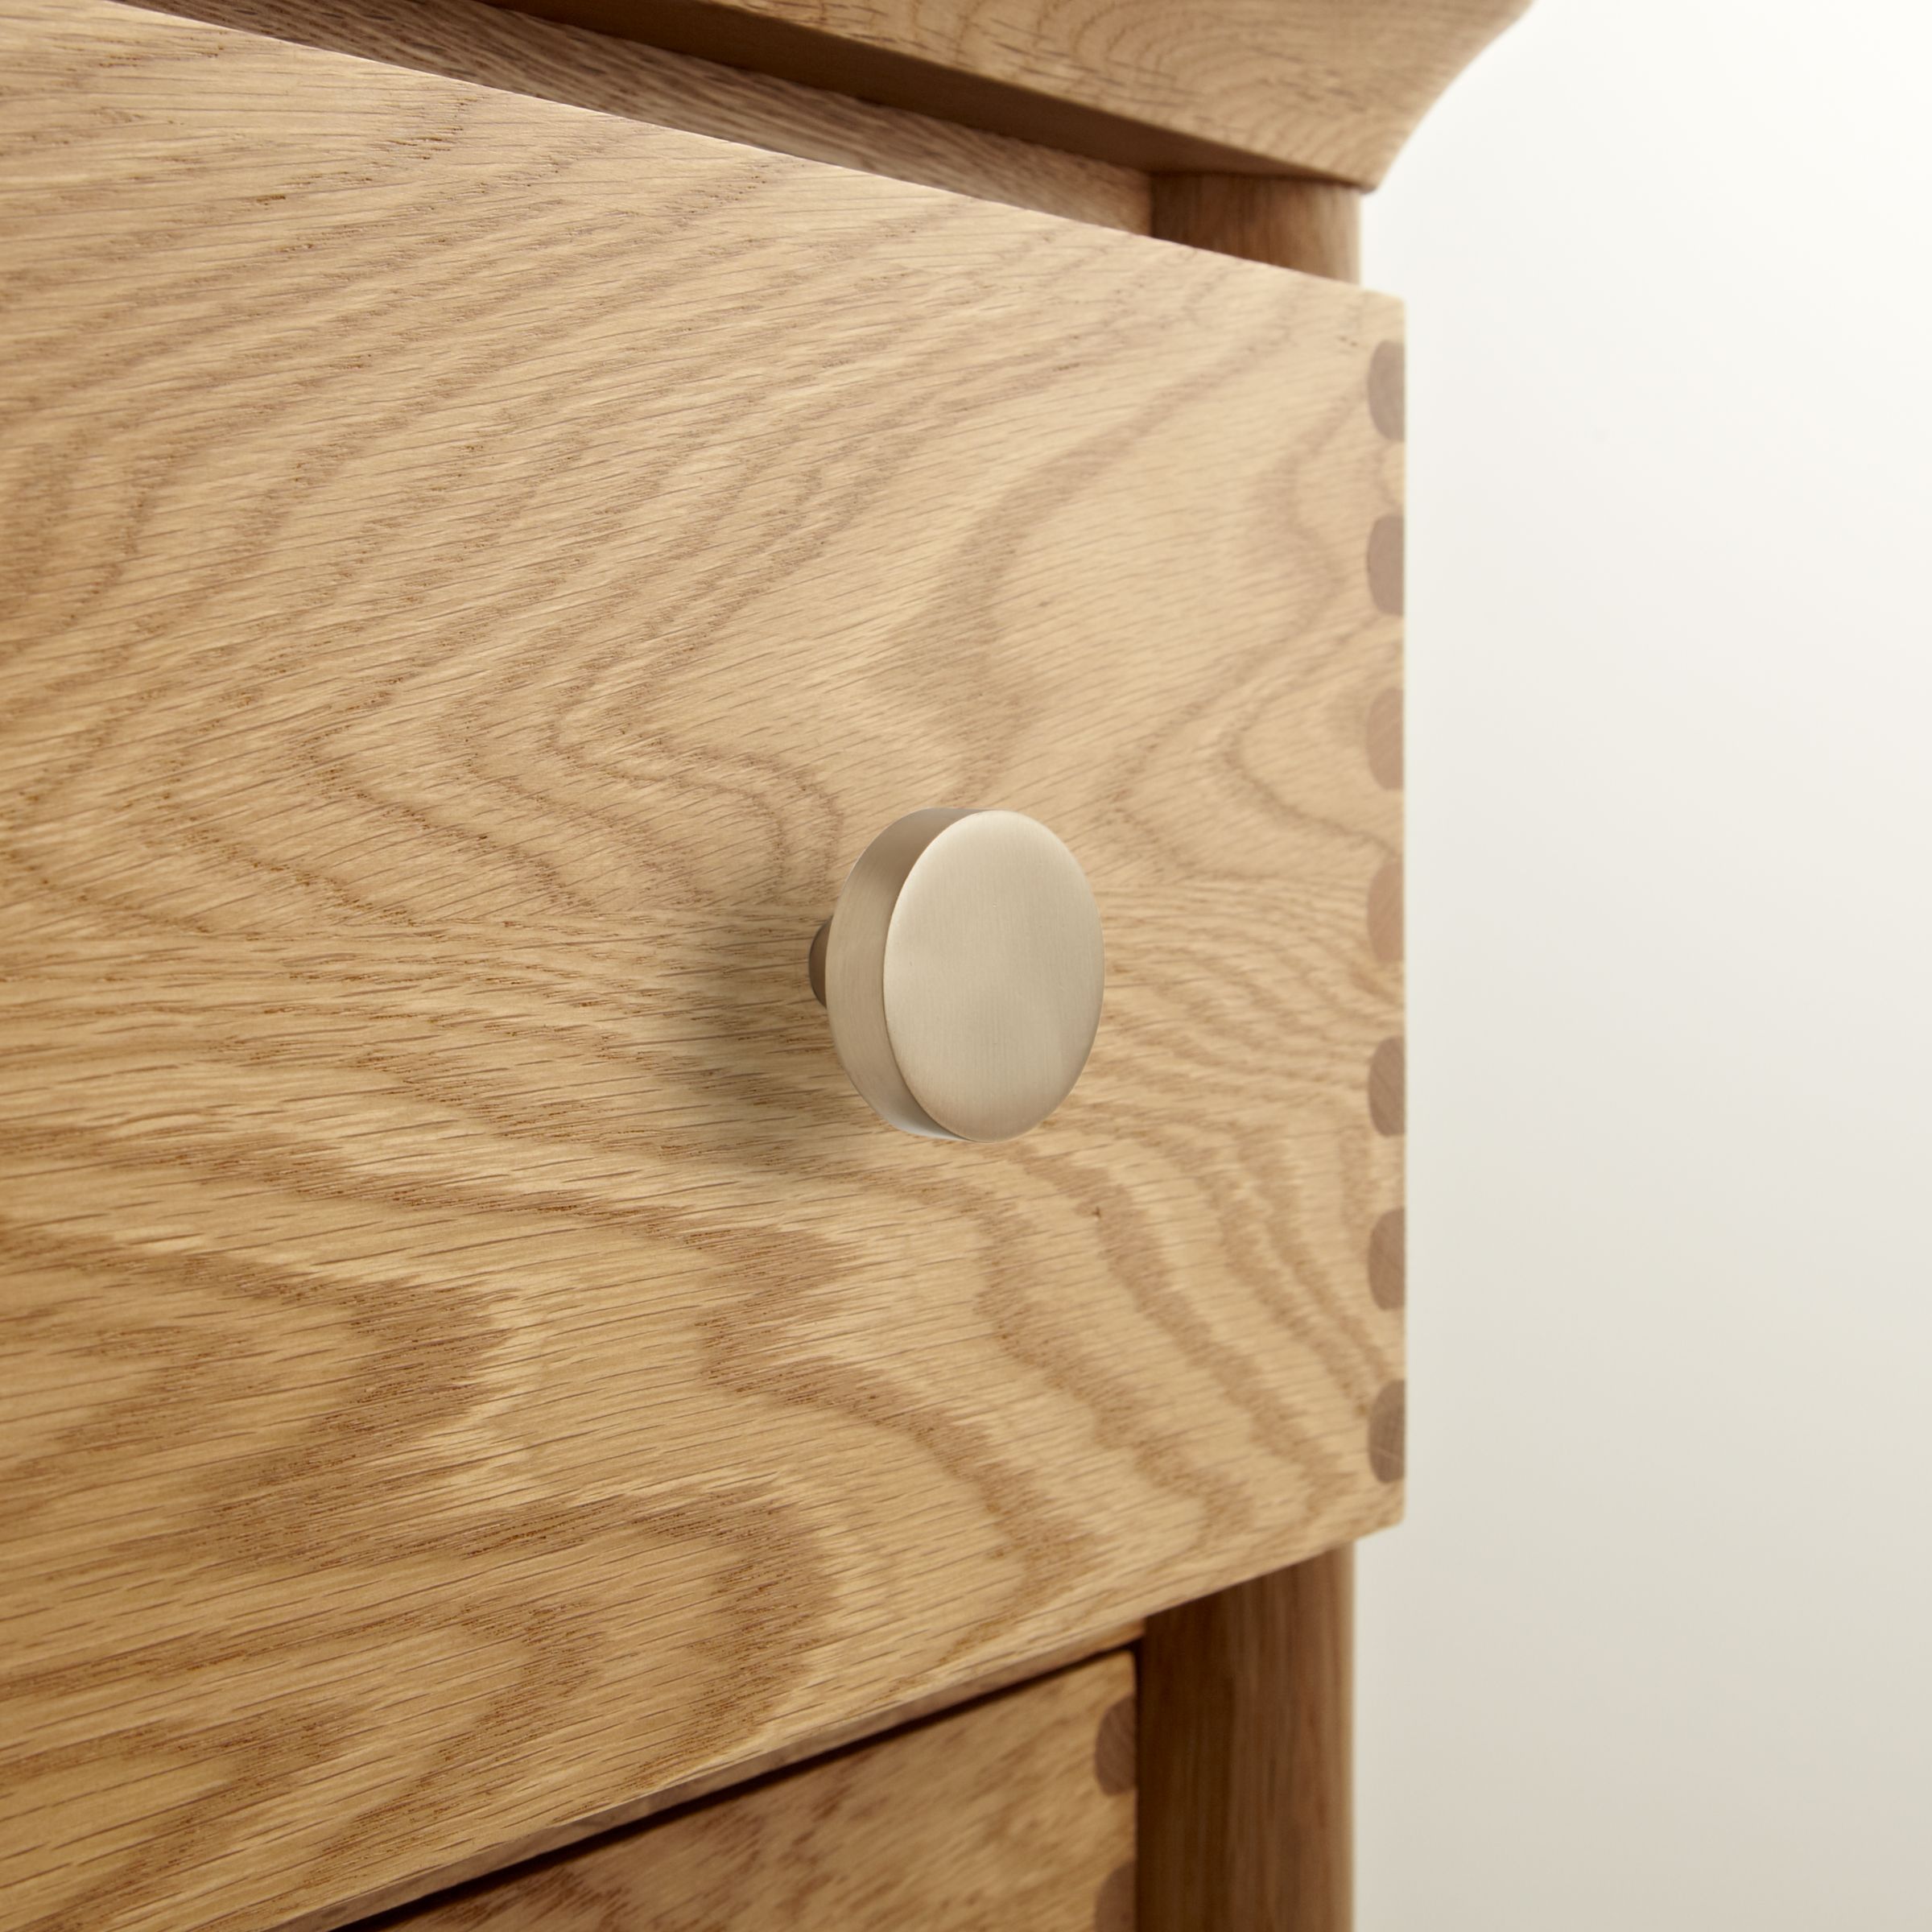 Design Project By John Lewis No 114 Cupboard Knob At John Lewis